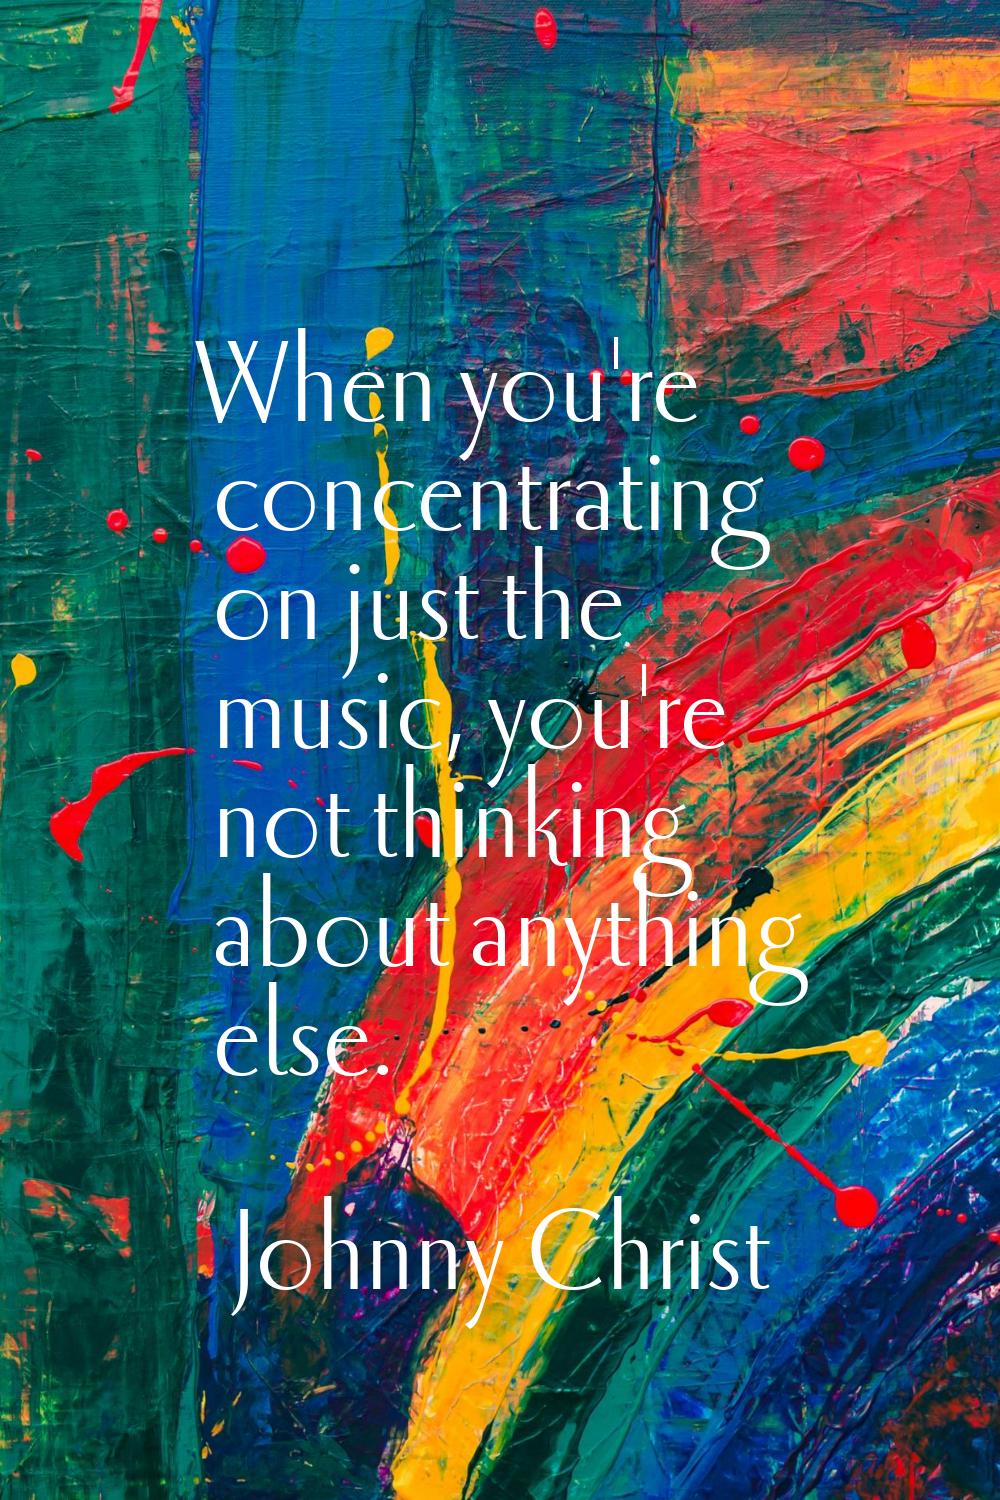 When you're concentrating on just the music, you're not thinking about anything else.